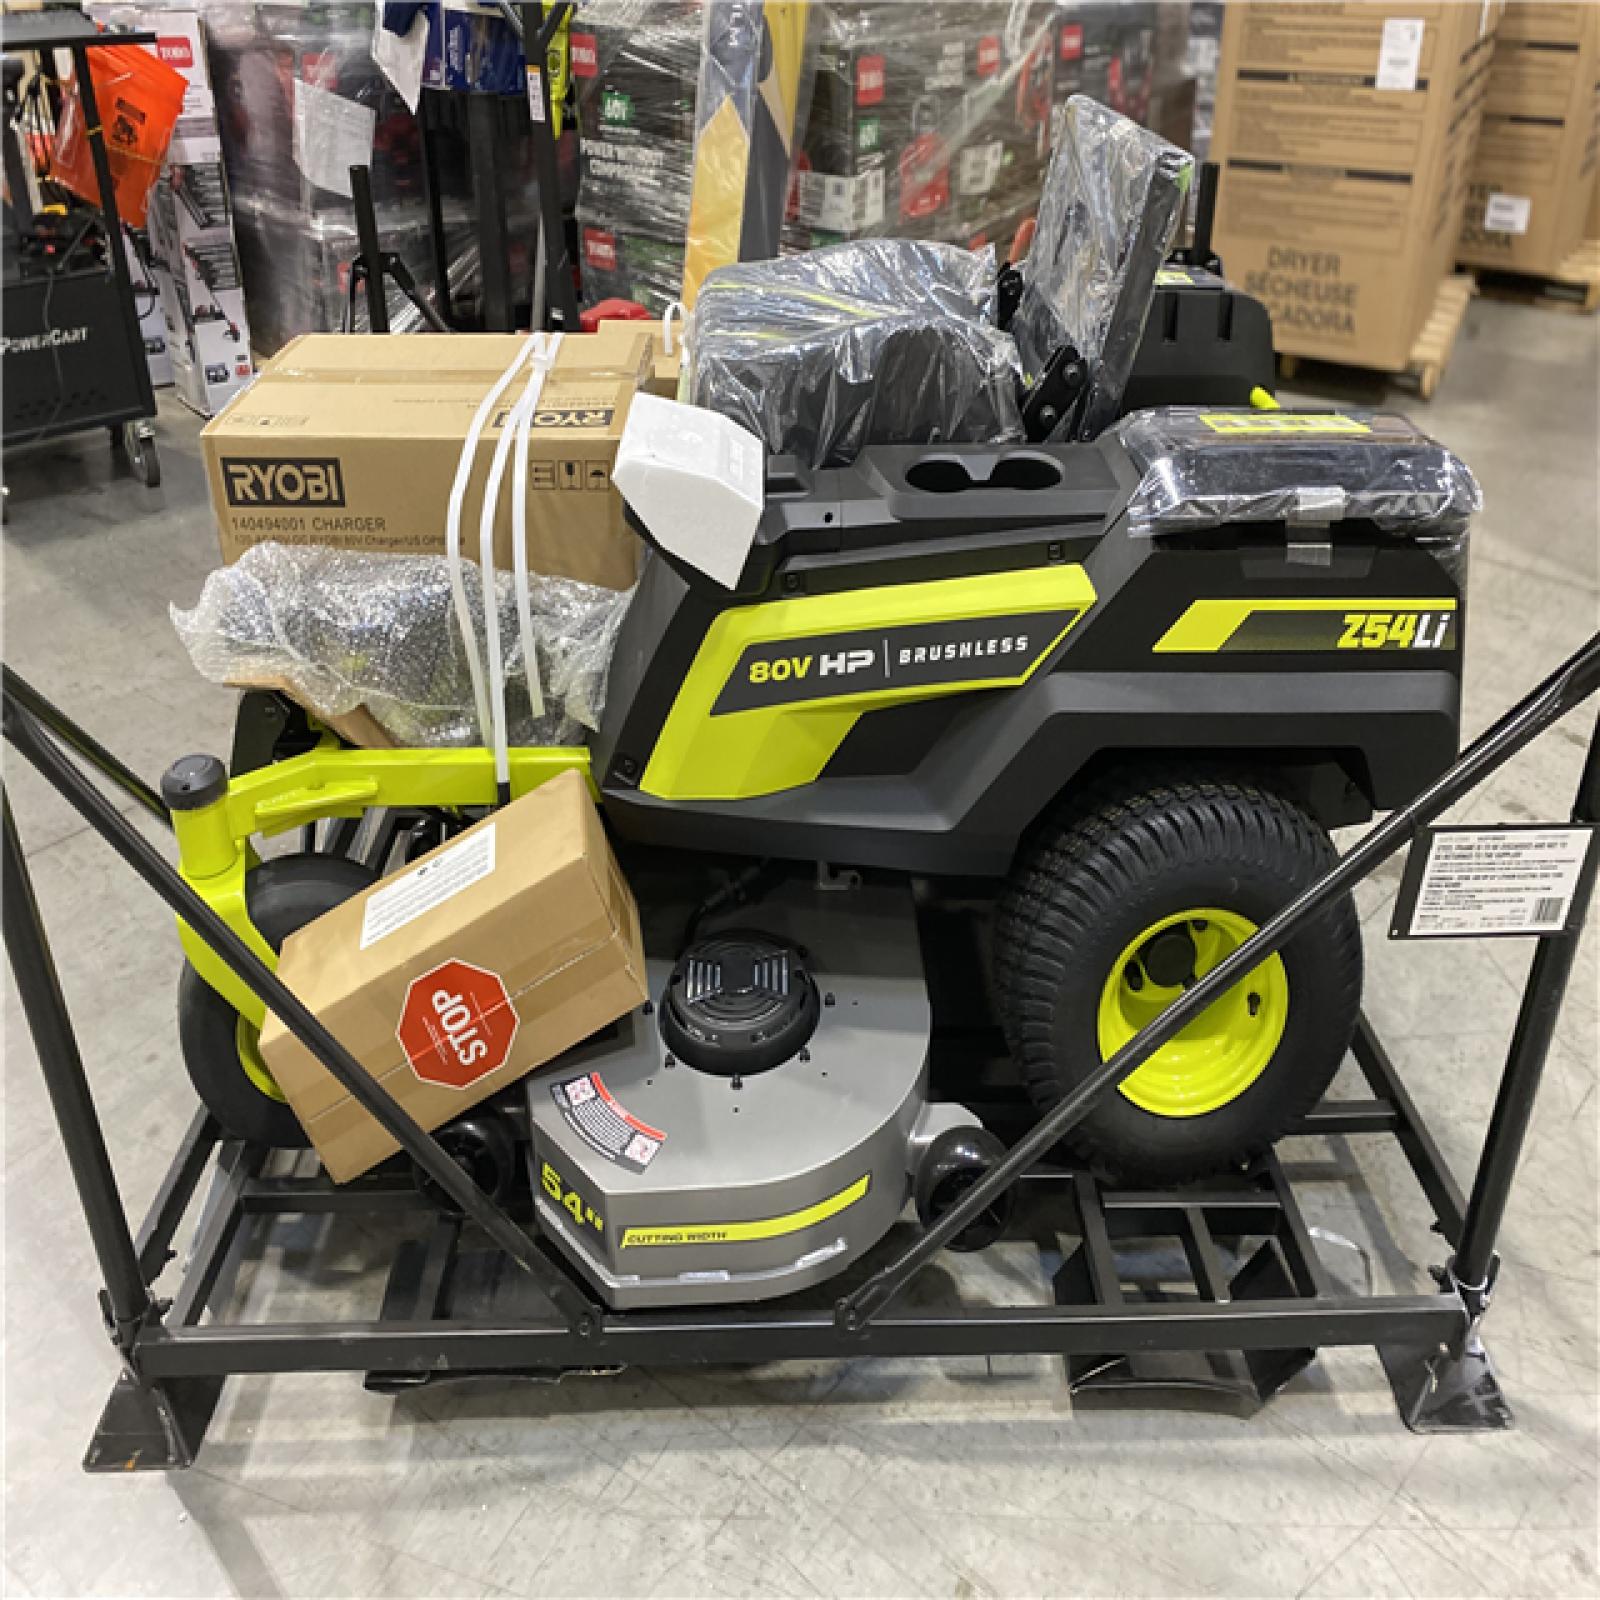 DALLAS LOCATION - NEW! RYOBI 80V HP Brushless 54 in. Battery Electric Cordless Zero Turn Riding Mower (3) 80V Batteries (4) 40V Batteries and Charger